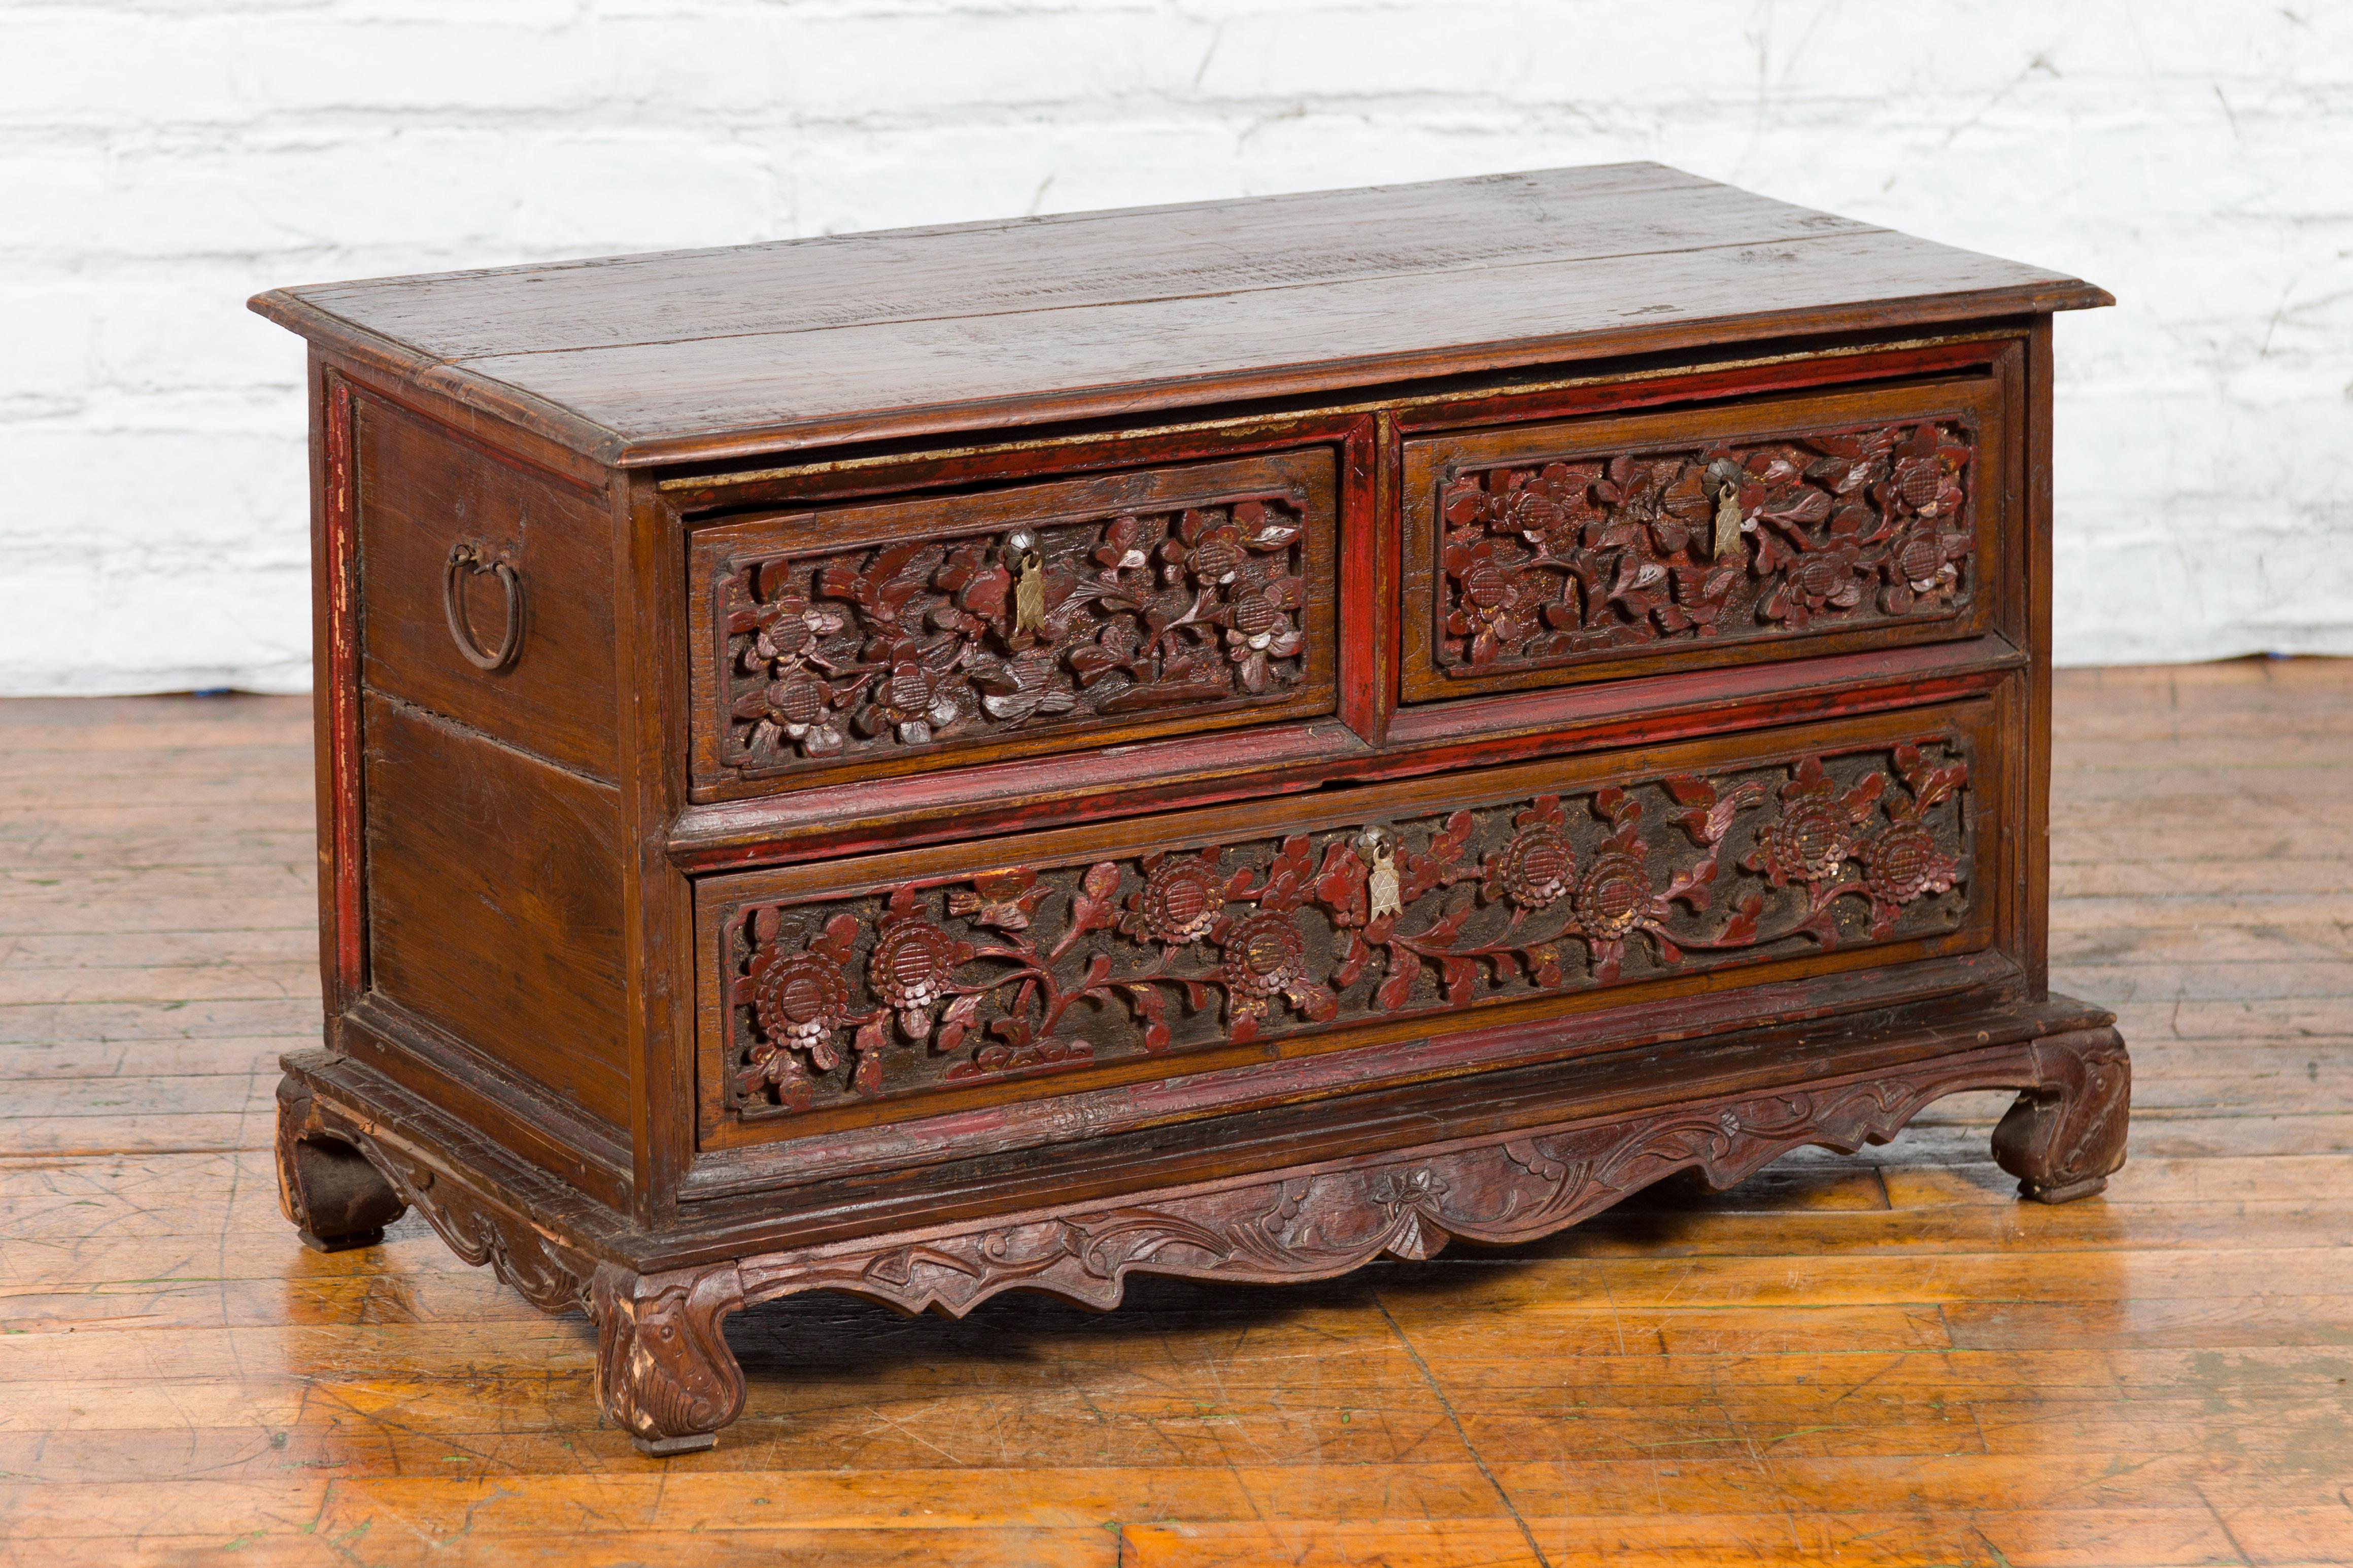 Javanese Early 20th Century Madurese Treasure Chest with Hand-Carved Floral Décor For Sale